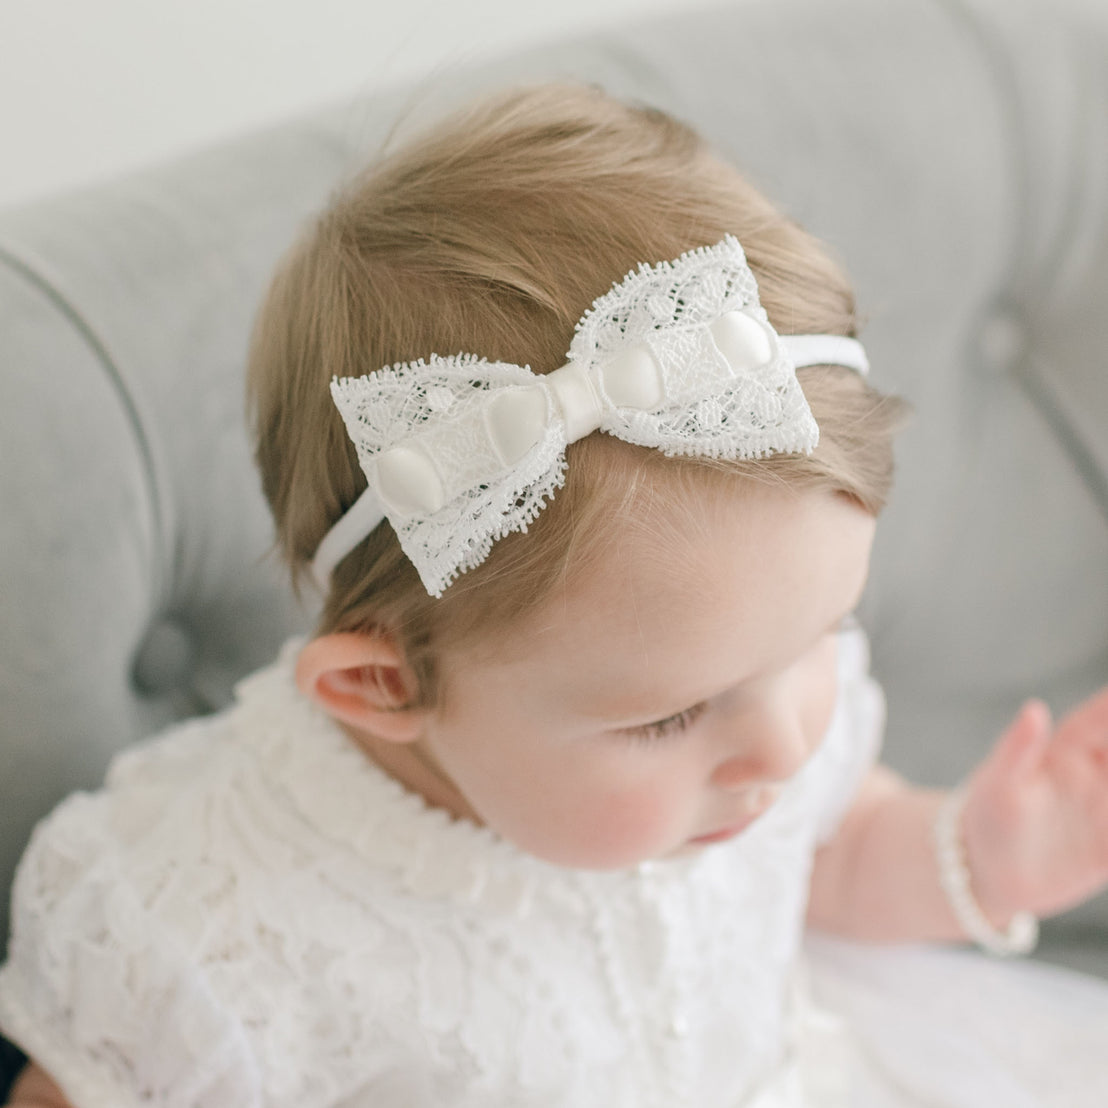 A baby with light hair wearing Aria Christening Gown and an Aria Lace Bow Headband, looking downward, seated on a gray upholstered chair.